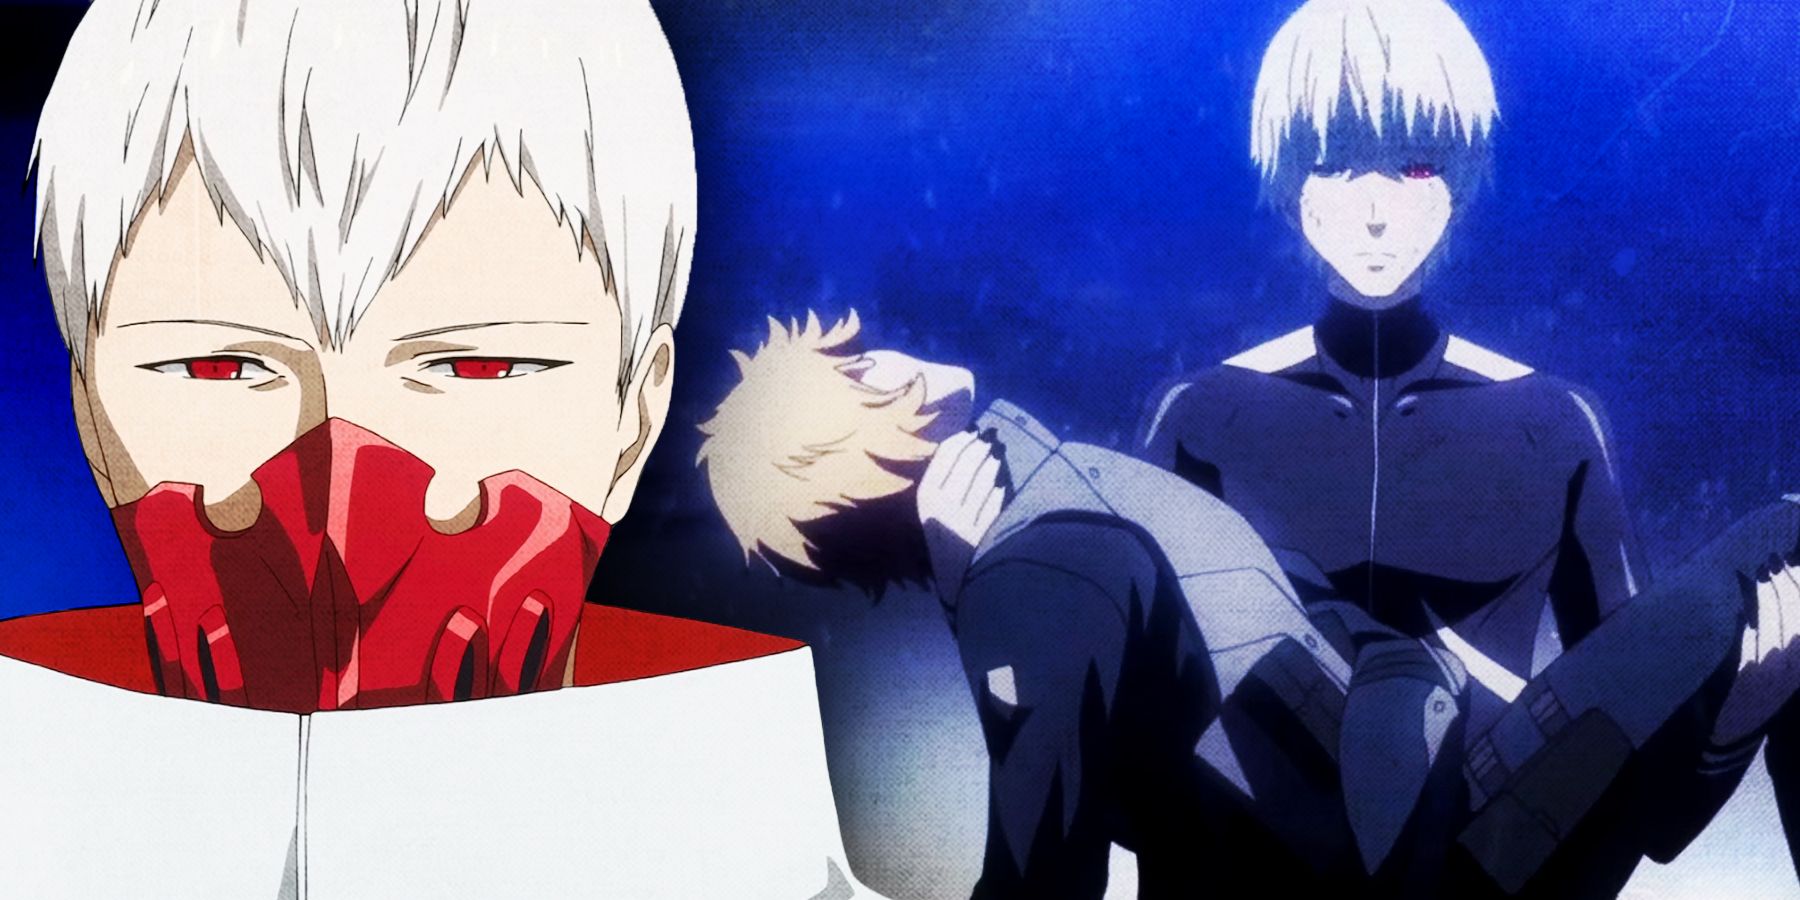 Tokyo Ghoul - Tokyo Ghoul:Re Episode 2 is now available on